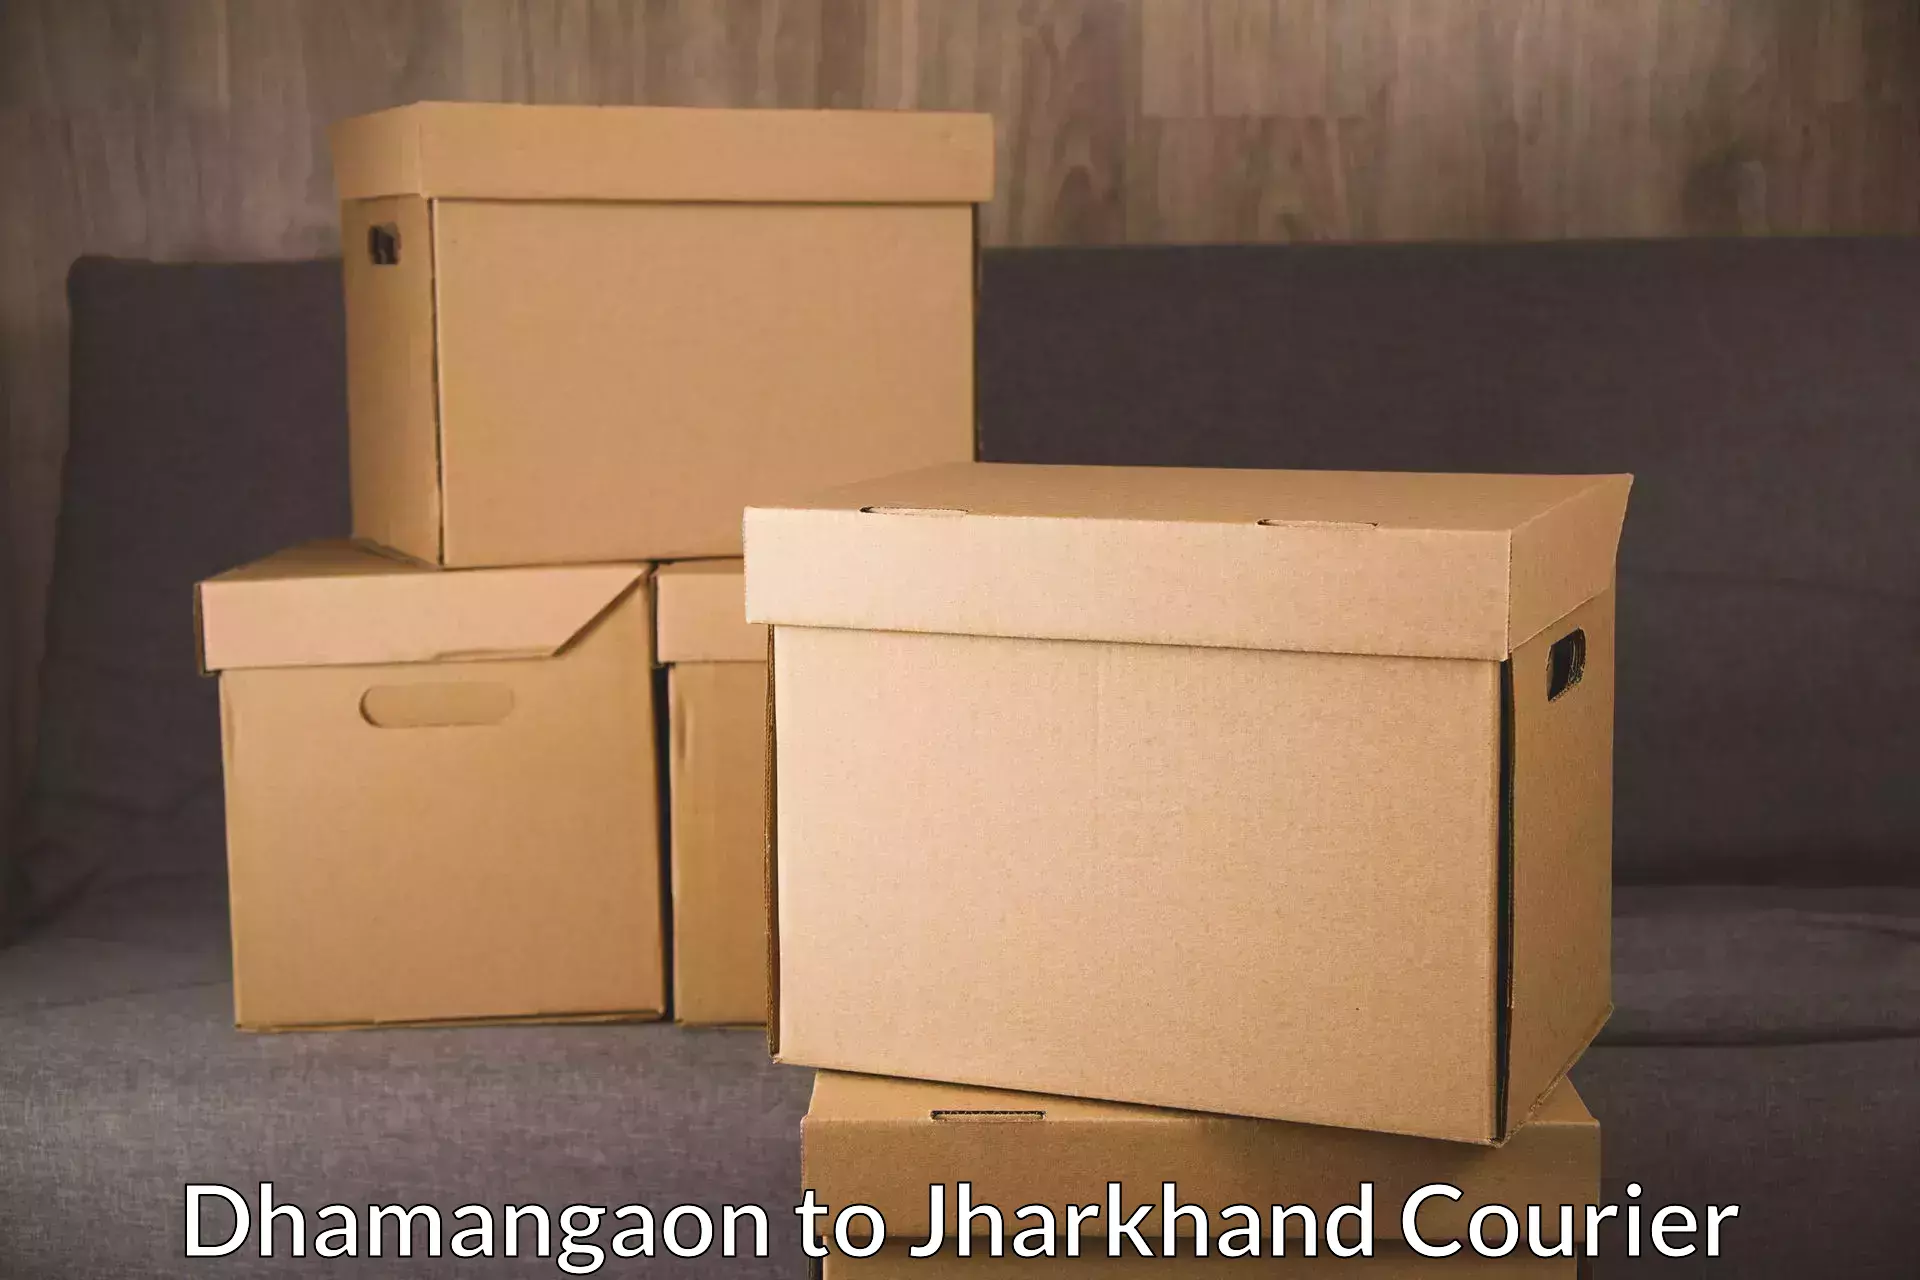 Express package services Dhamangaon to Dhanbad